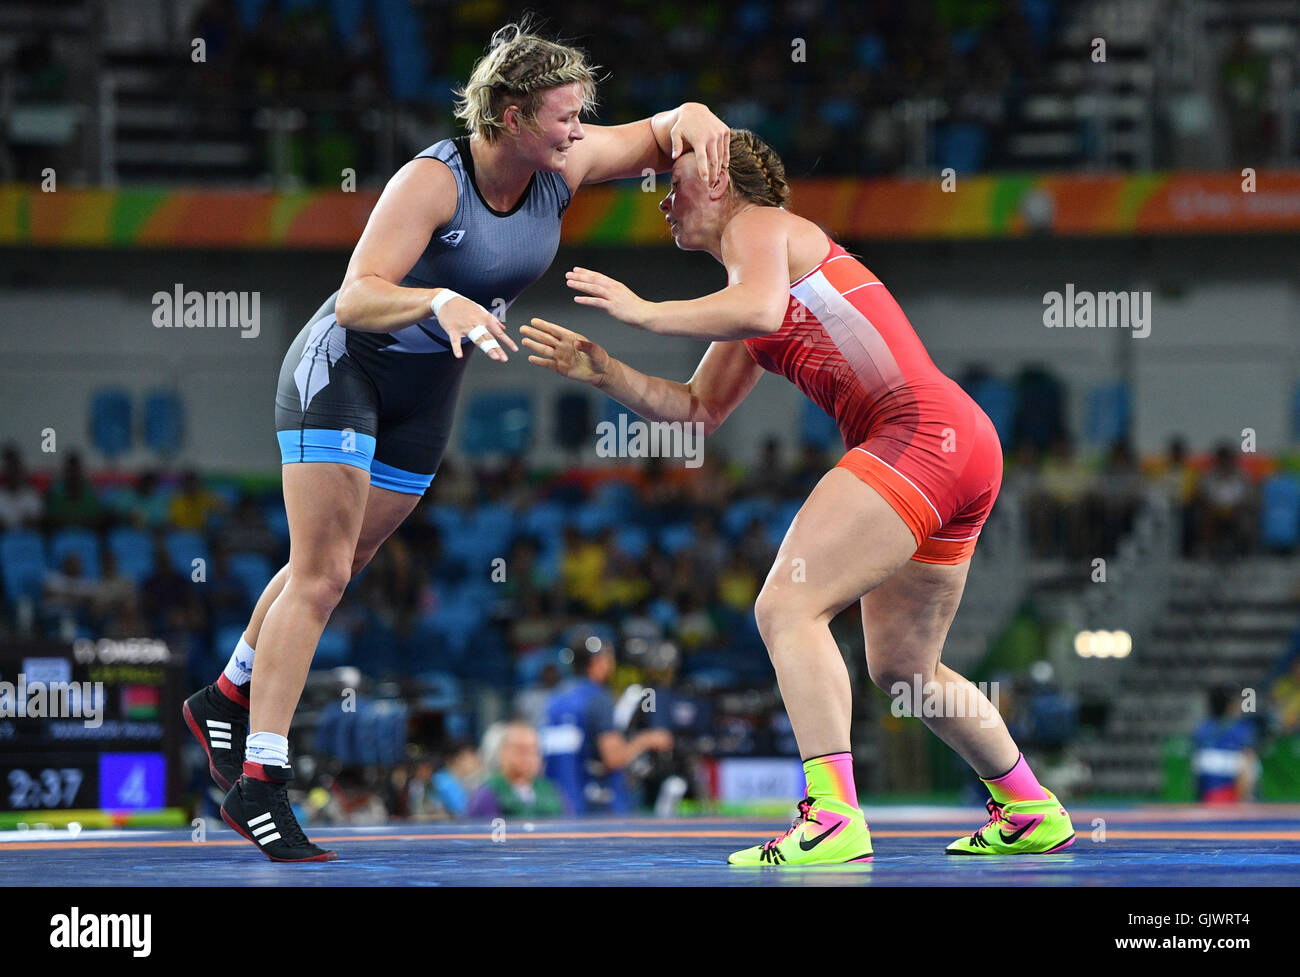 Rio de Janeiro, Brazil. 18th Aug, 2016. Maria Selmaier (L) of Germany in  action against Elizabeth Erica Wiebe of Canada during the Women's Freestyle  75 kg 1/8 Final of the Wrestling events